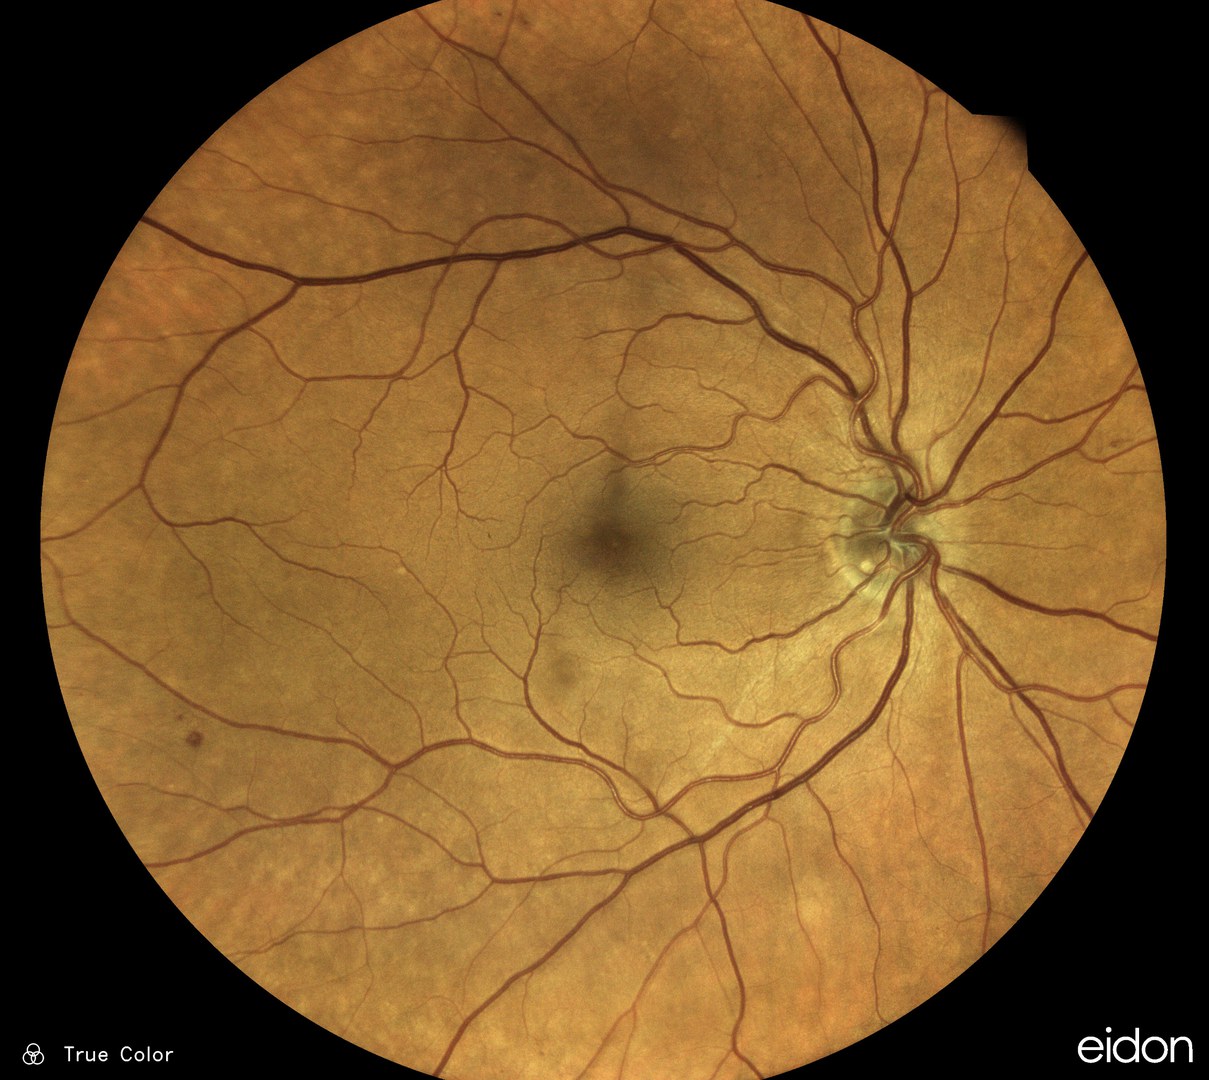 The fundus of the human eye is well perfused.